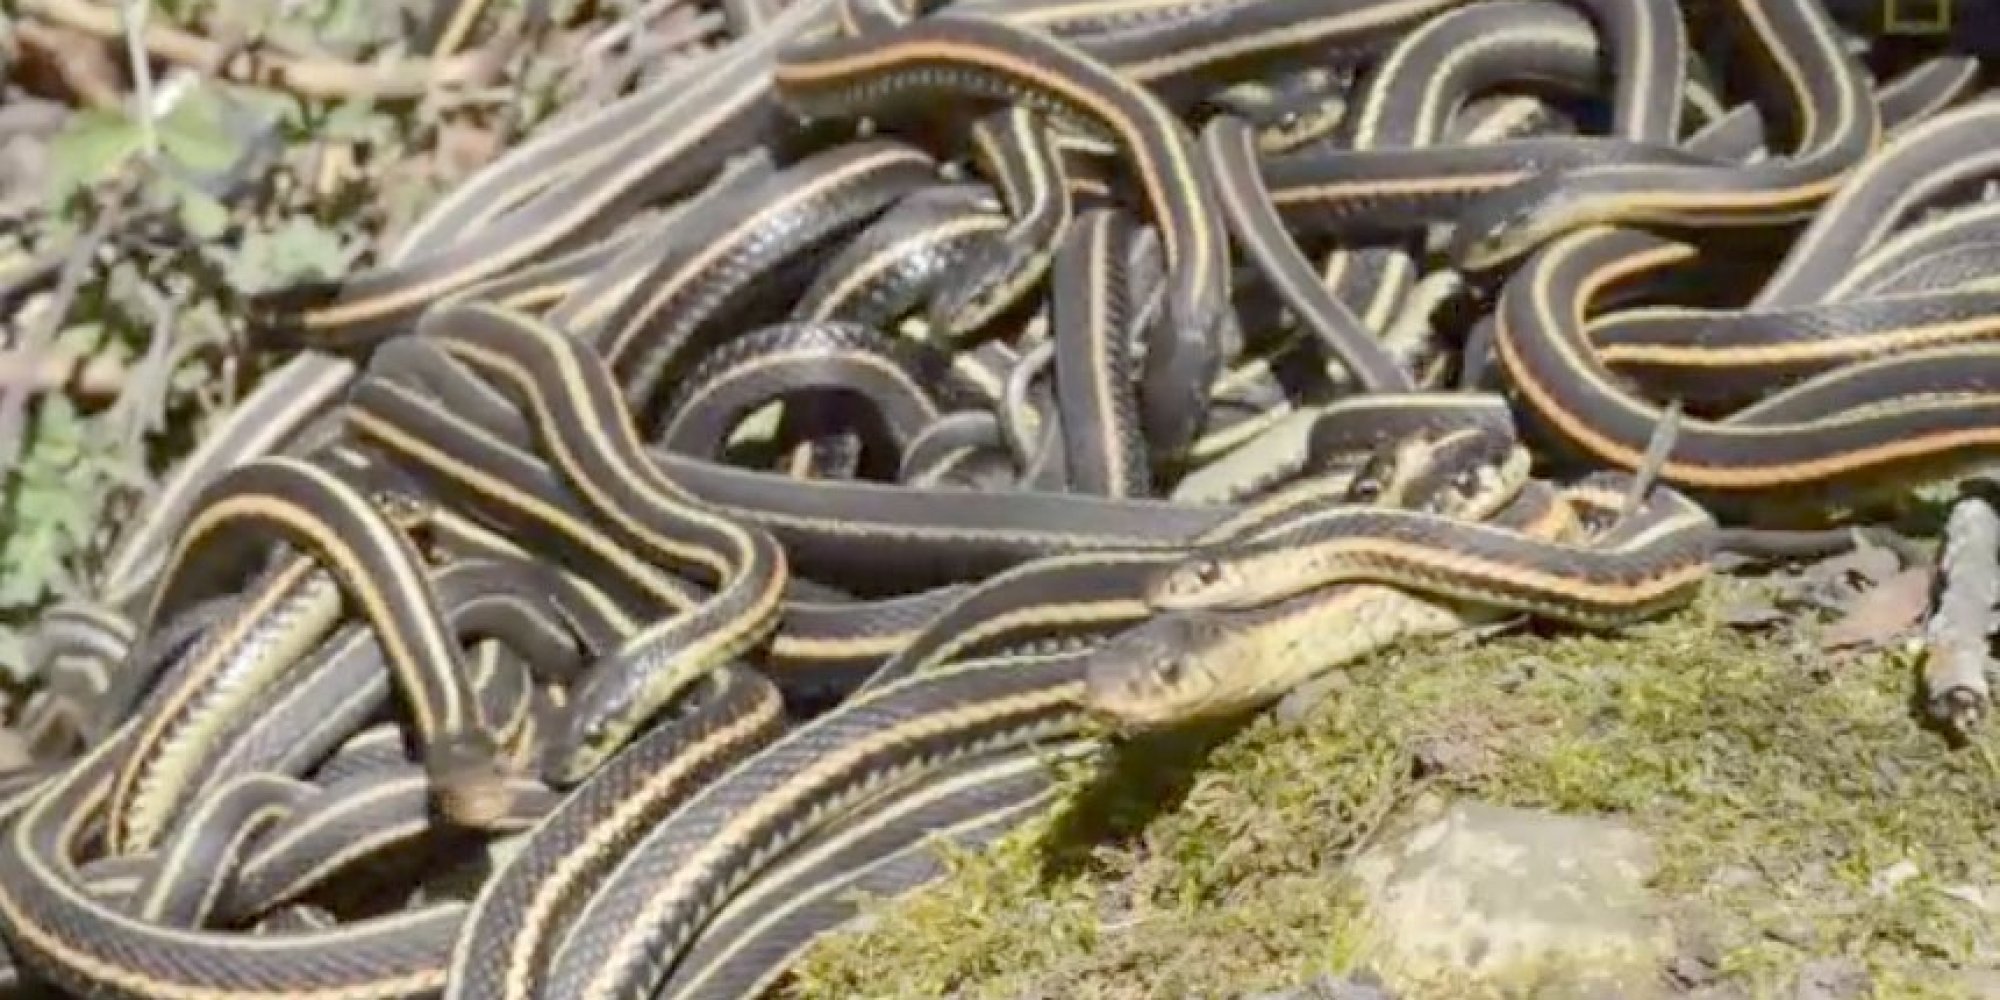 This Is The Largest Gathering Of Snakes In The World 